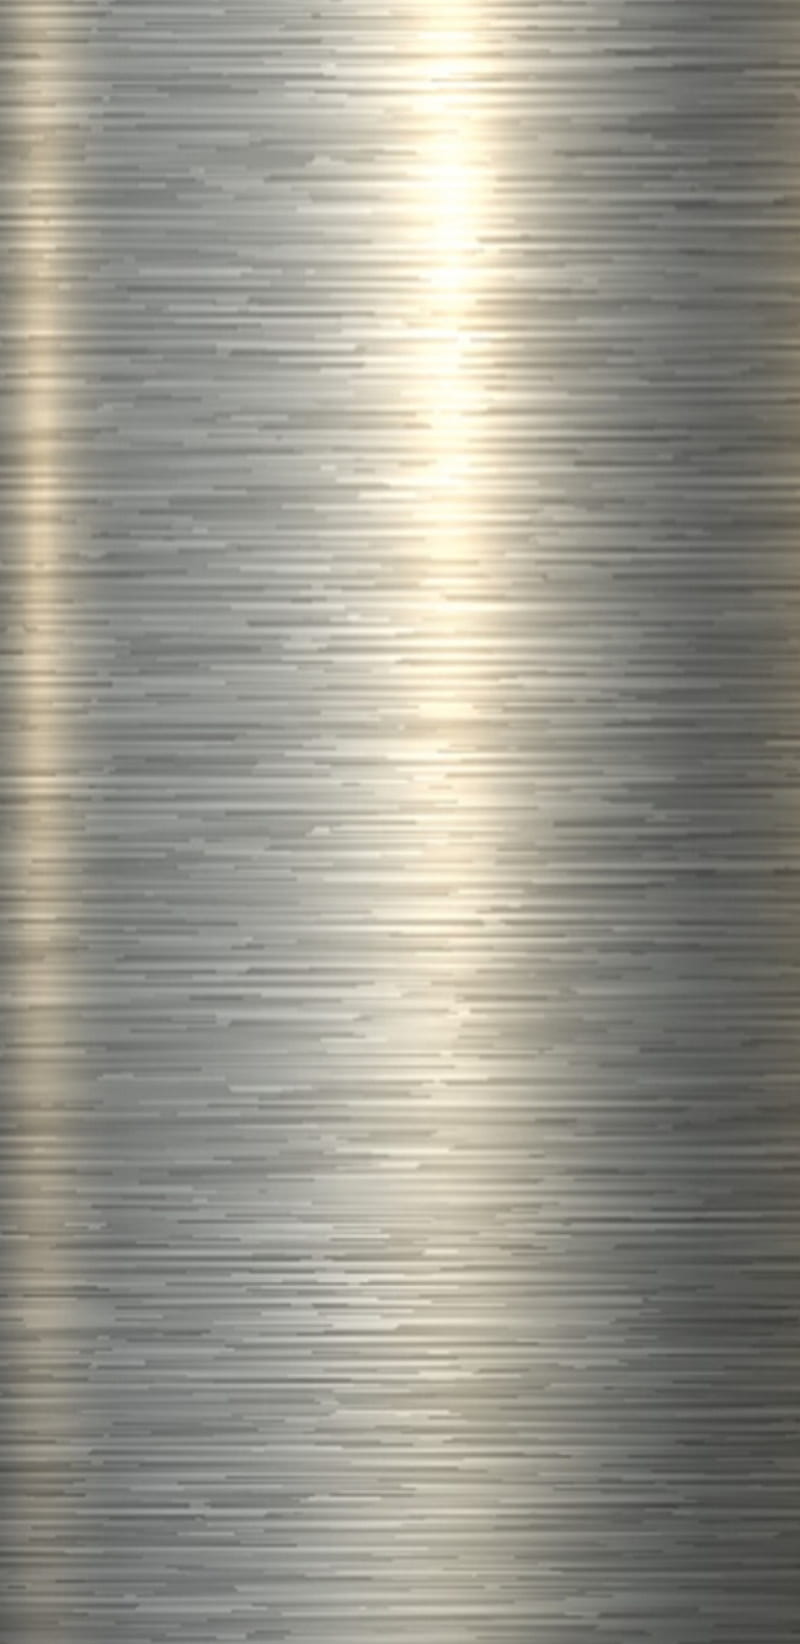 Stainless steel metal background Or texture  Ad steel Stainless  metal texture background a  Metal background Stainless steel  texture Metal texture